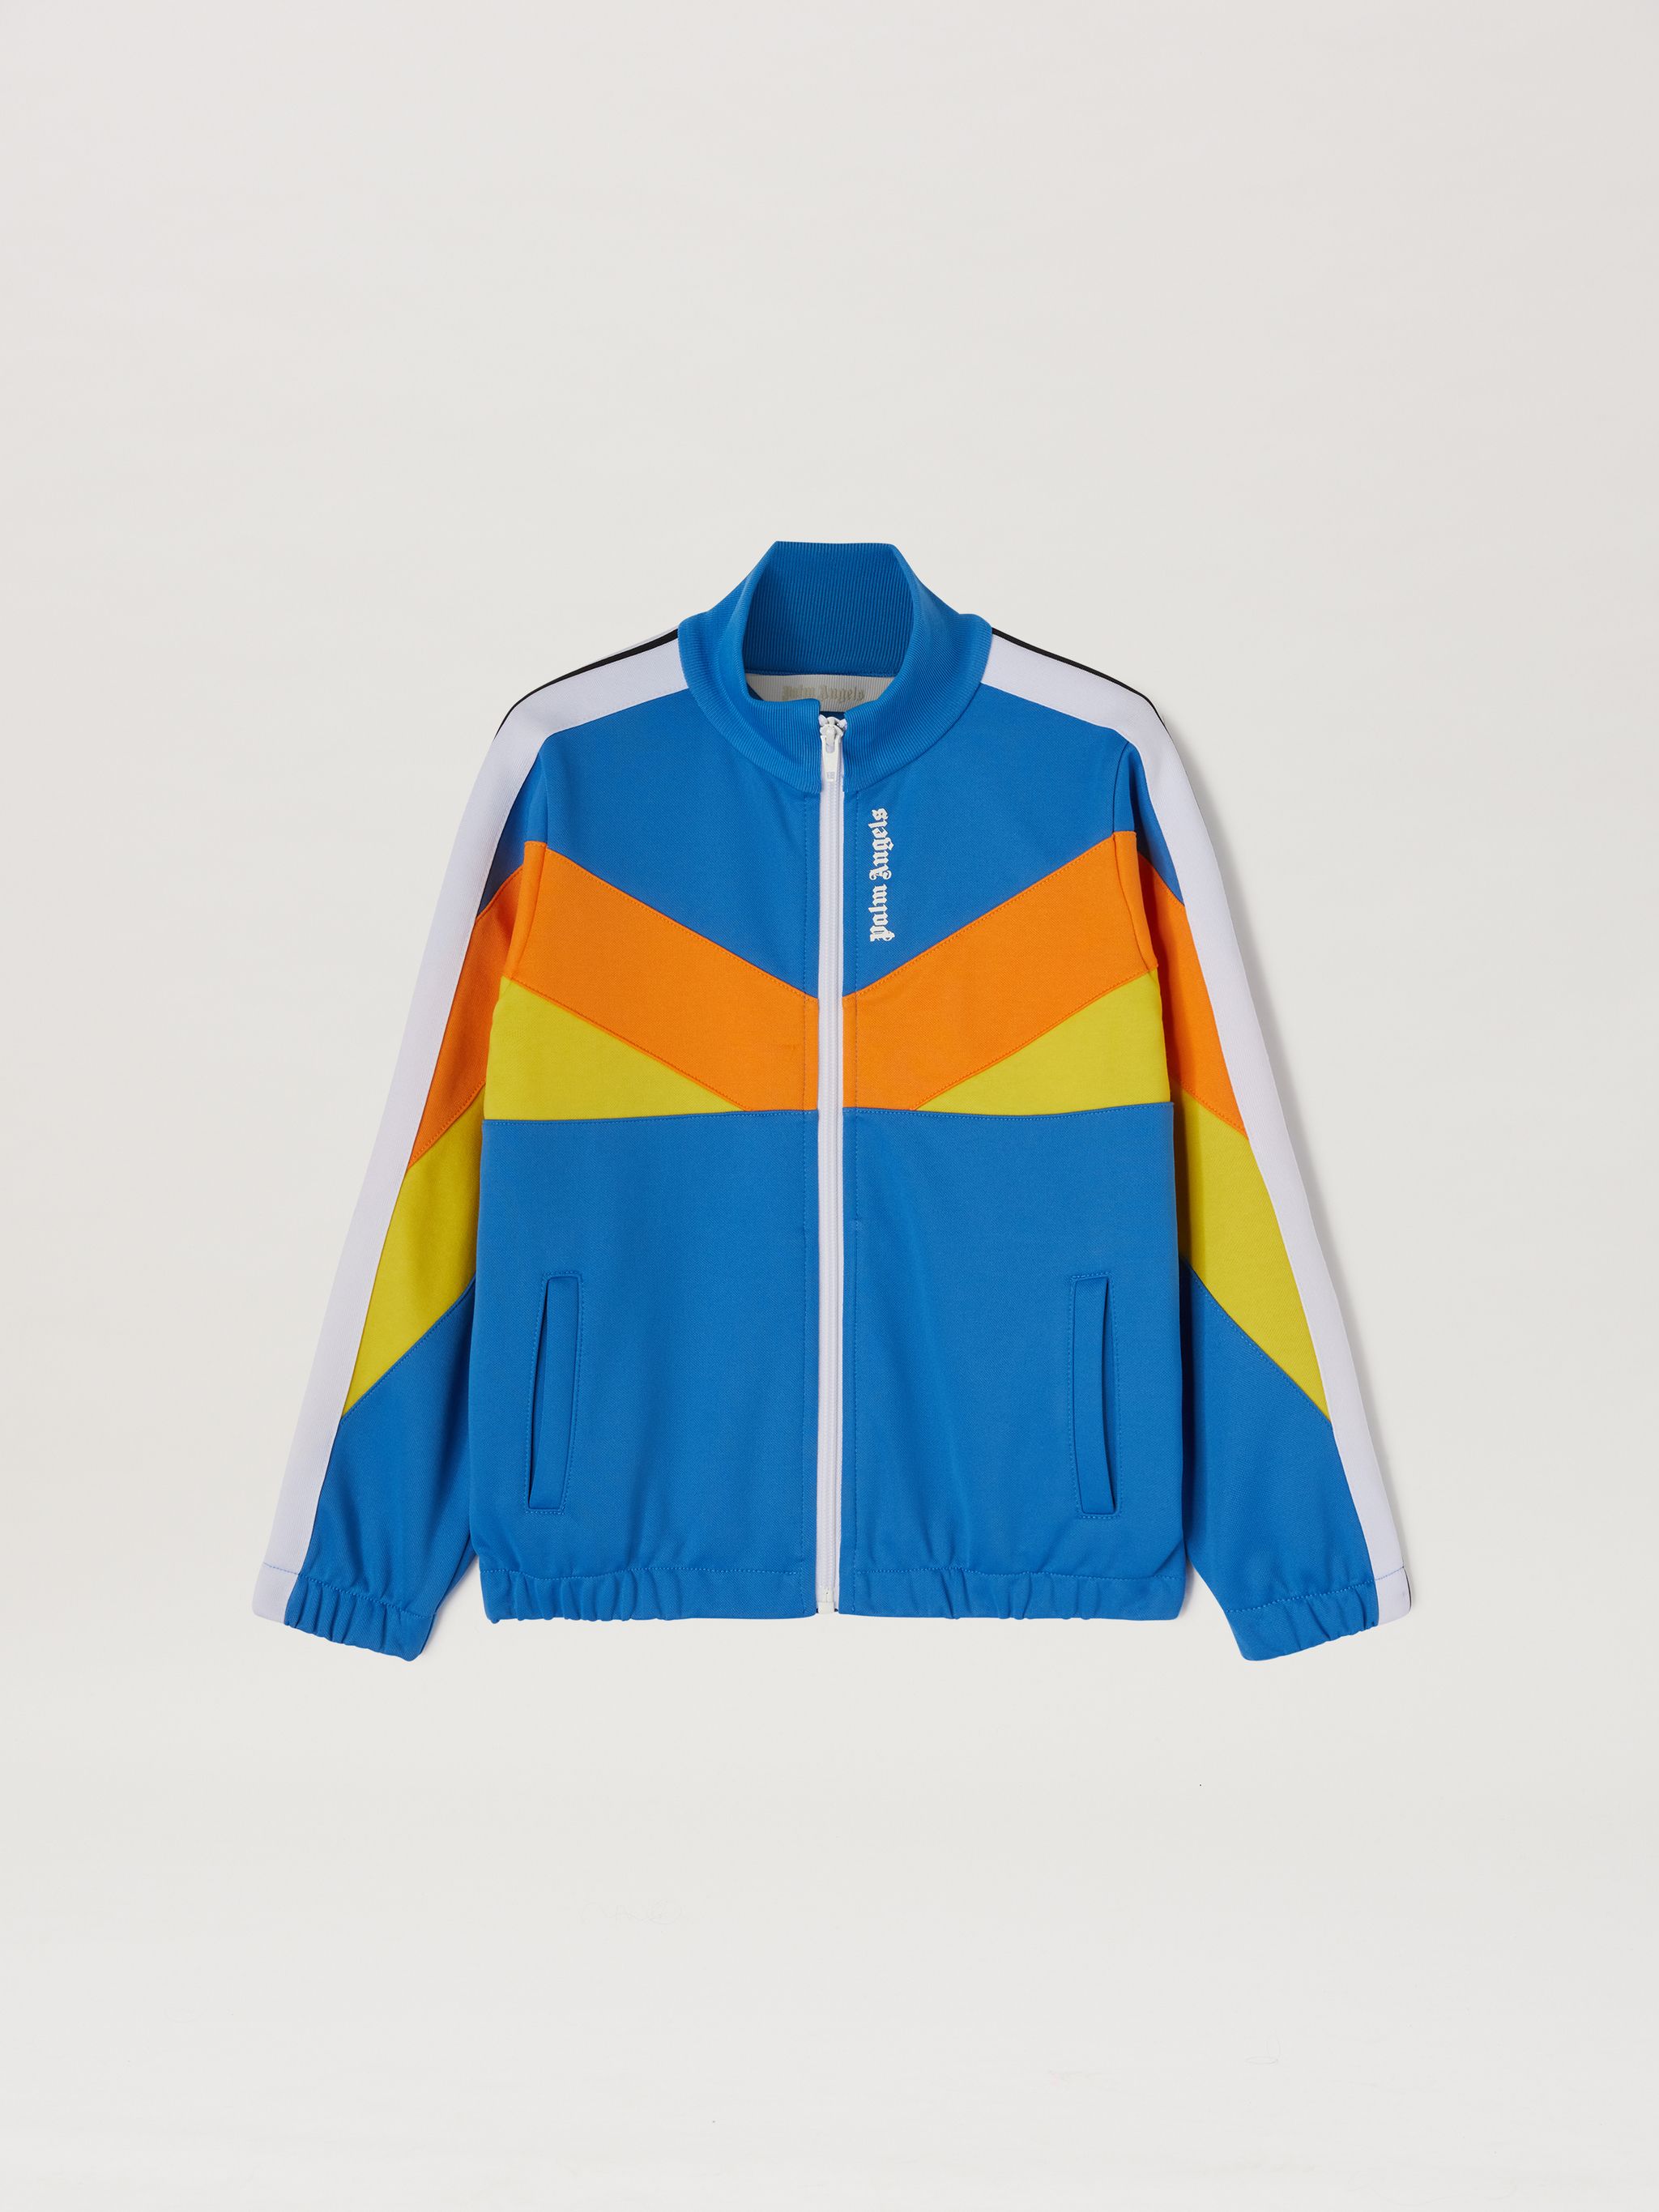 PALM ANGELS TRACK JACKET in orange - Palm Angels® Official